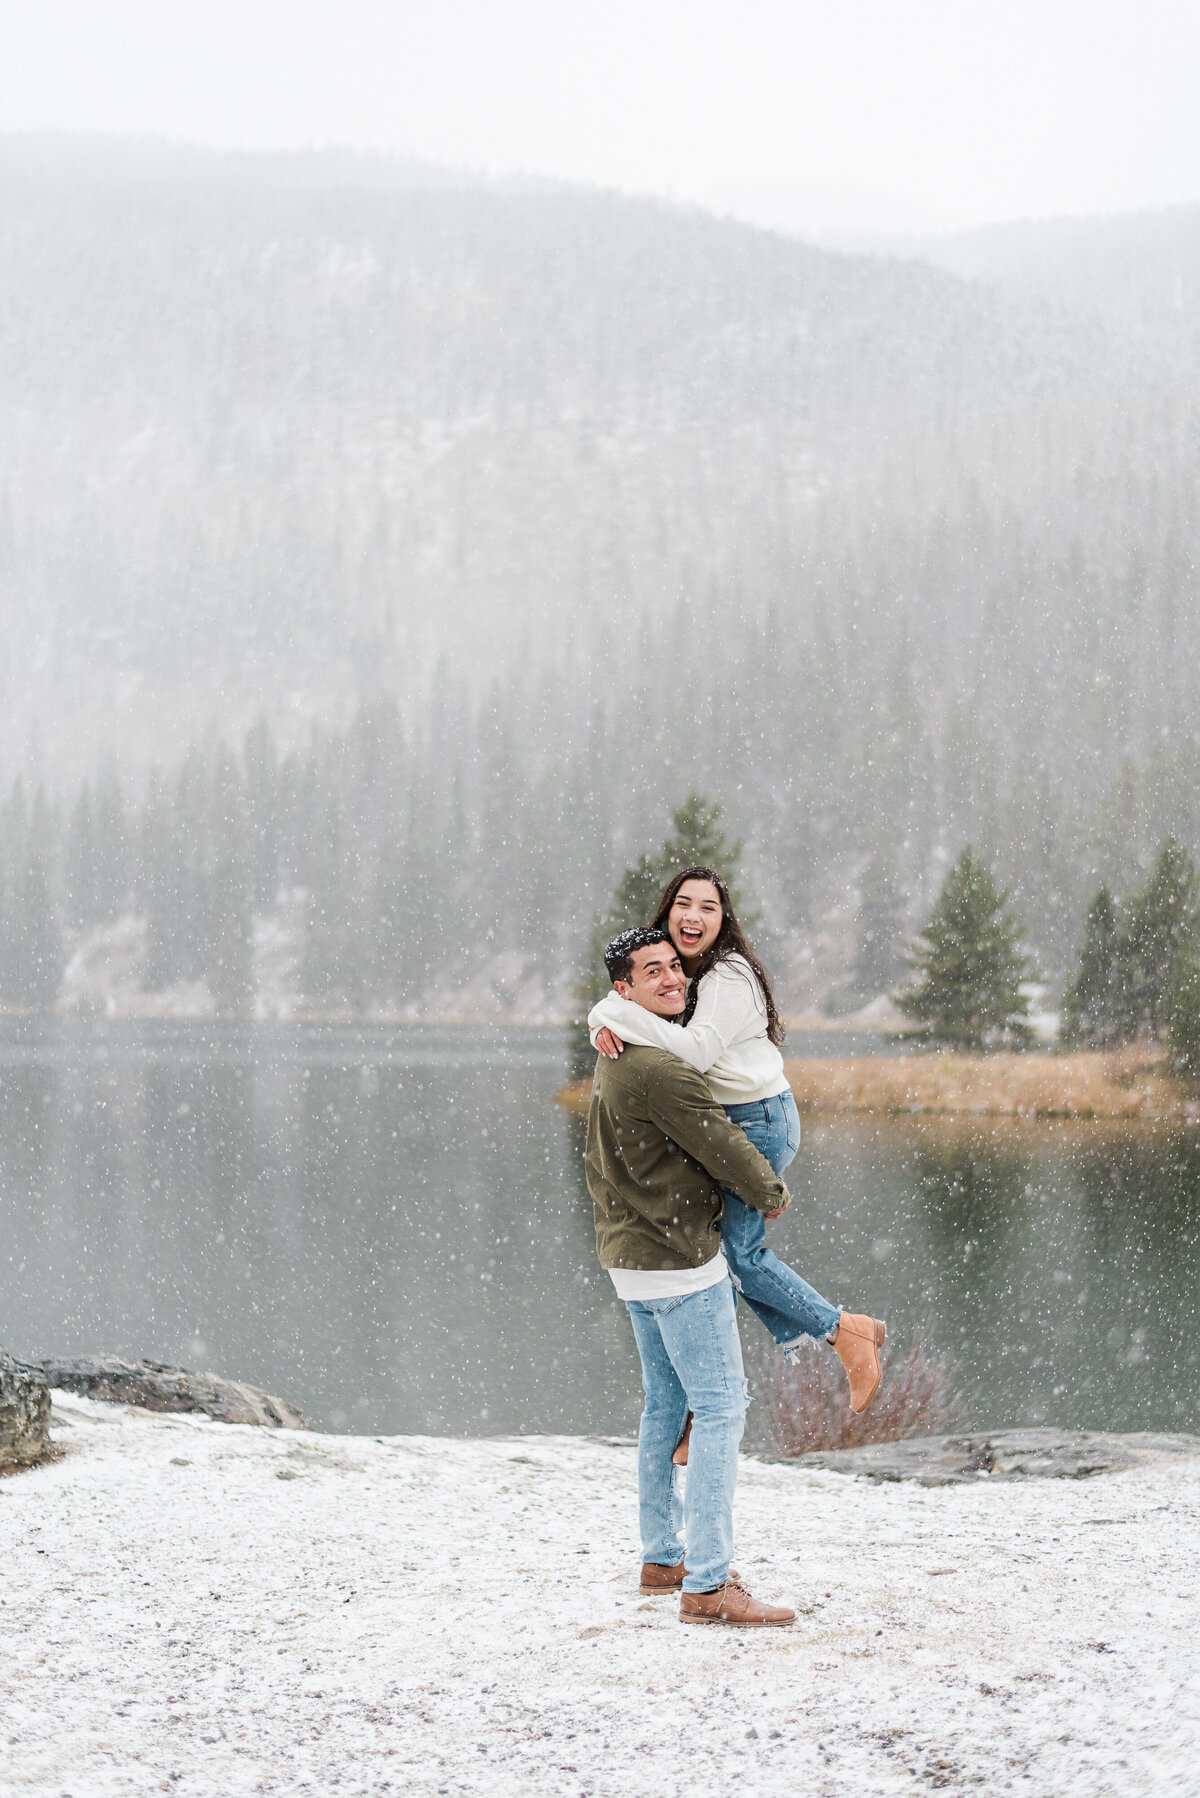 denver couples photography during winter with man picking up woman while it snows on a lake behind them in the woods captured by denver engagement photographer